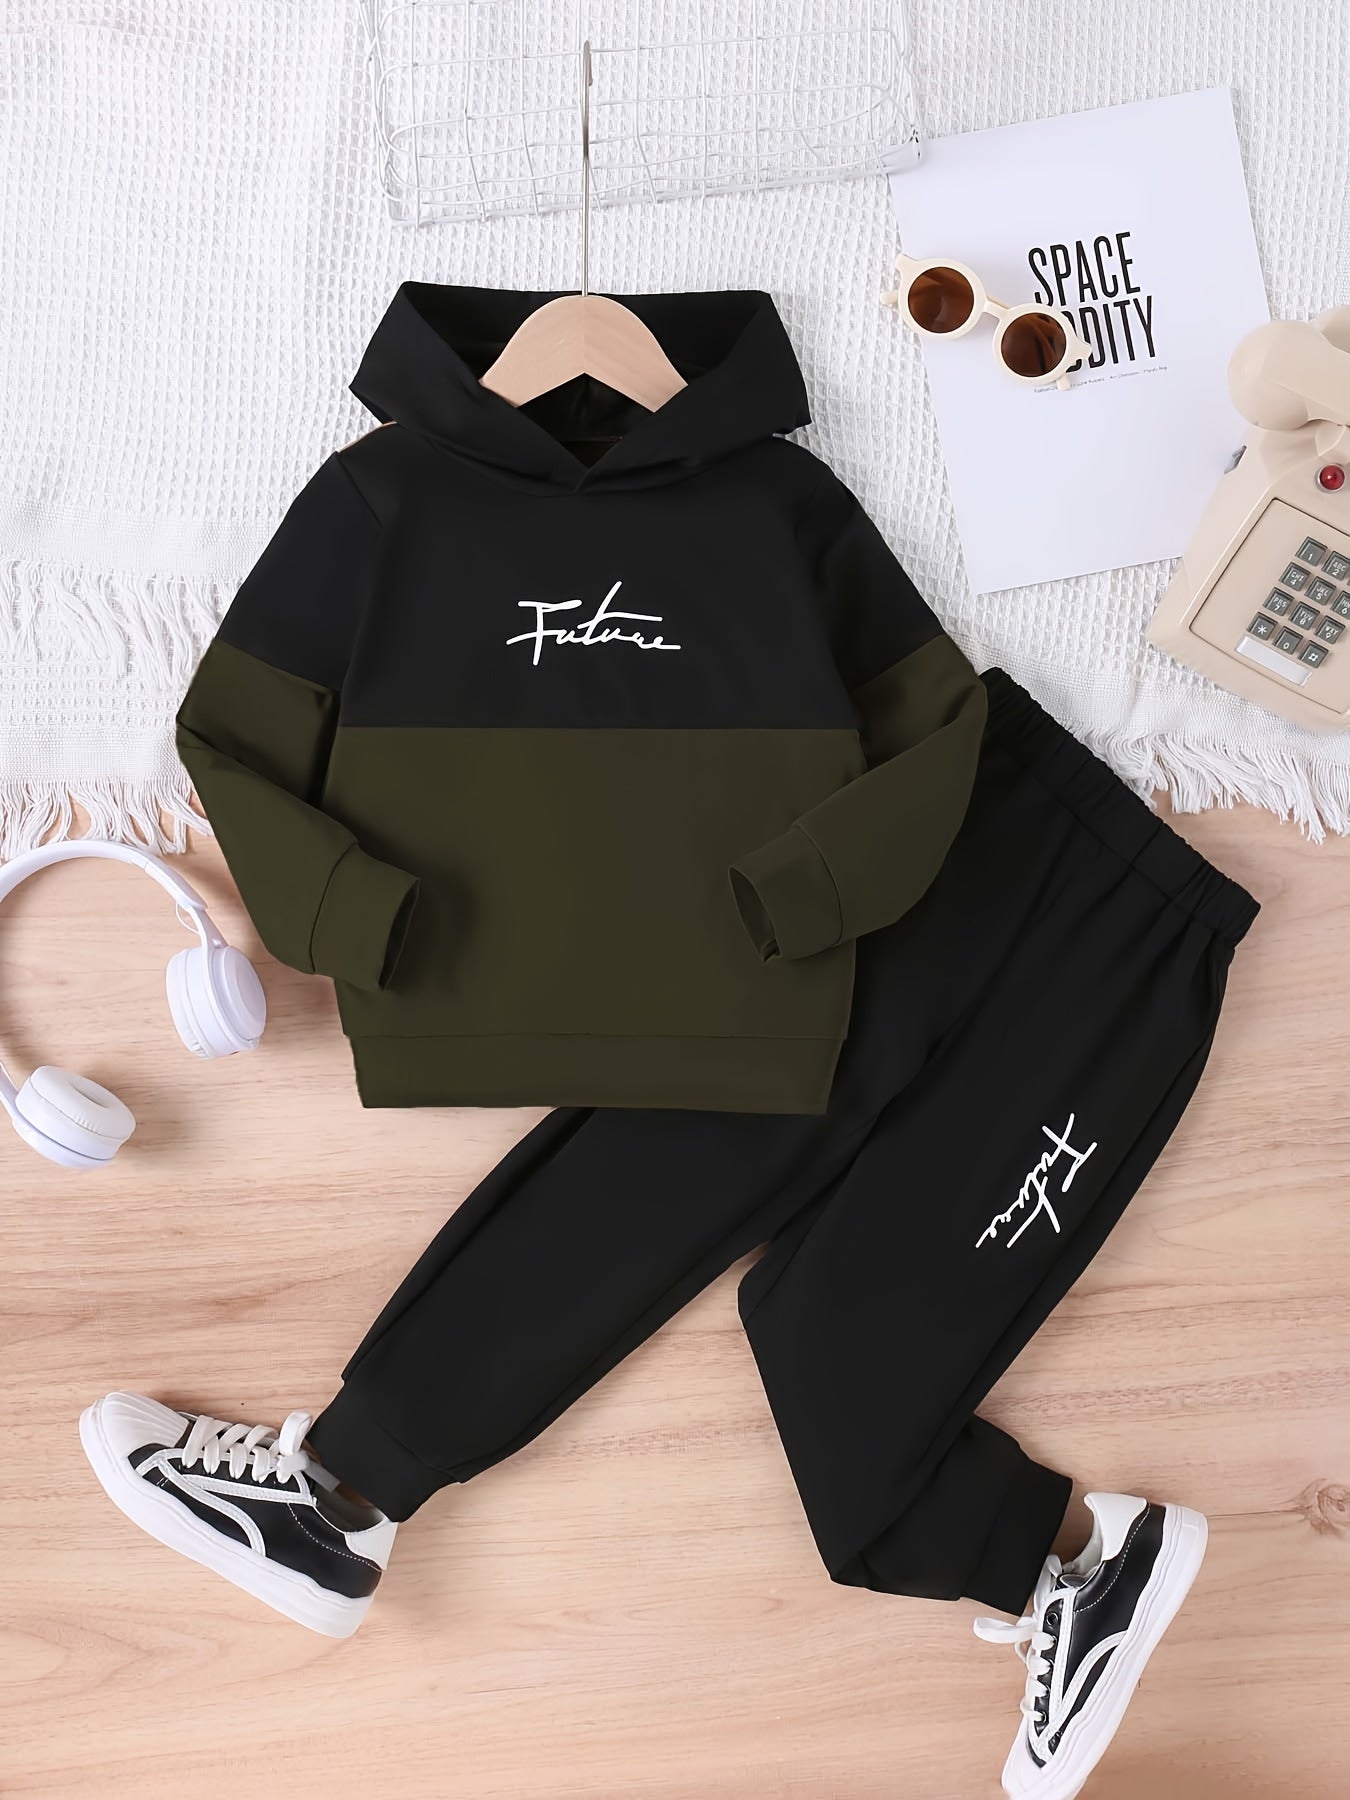 2pcs Toddler Boy's Color Clash Outfit, Hoodie & Sweatpants Set, FUTURE Print Hooded Long Sleeve Top, Kid's Clothes For Spring Fall Winter